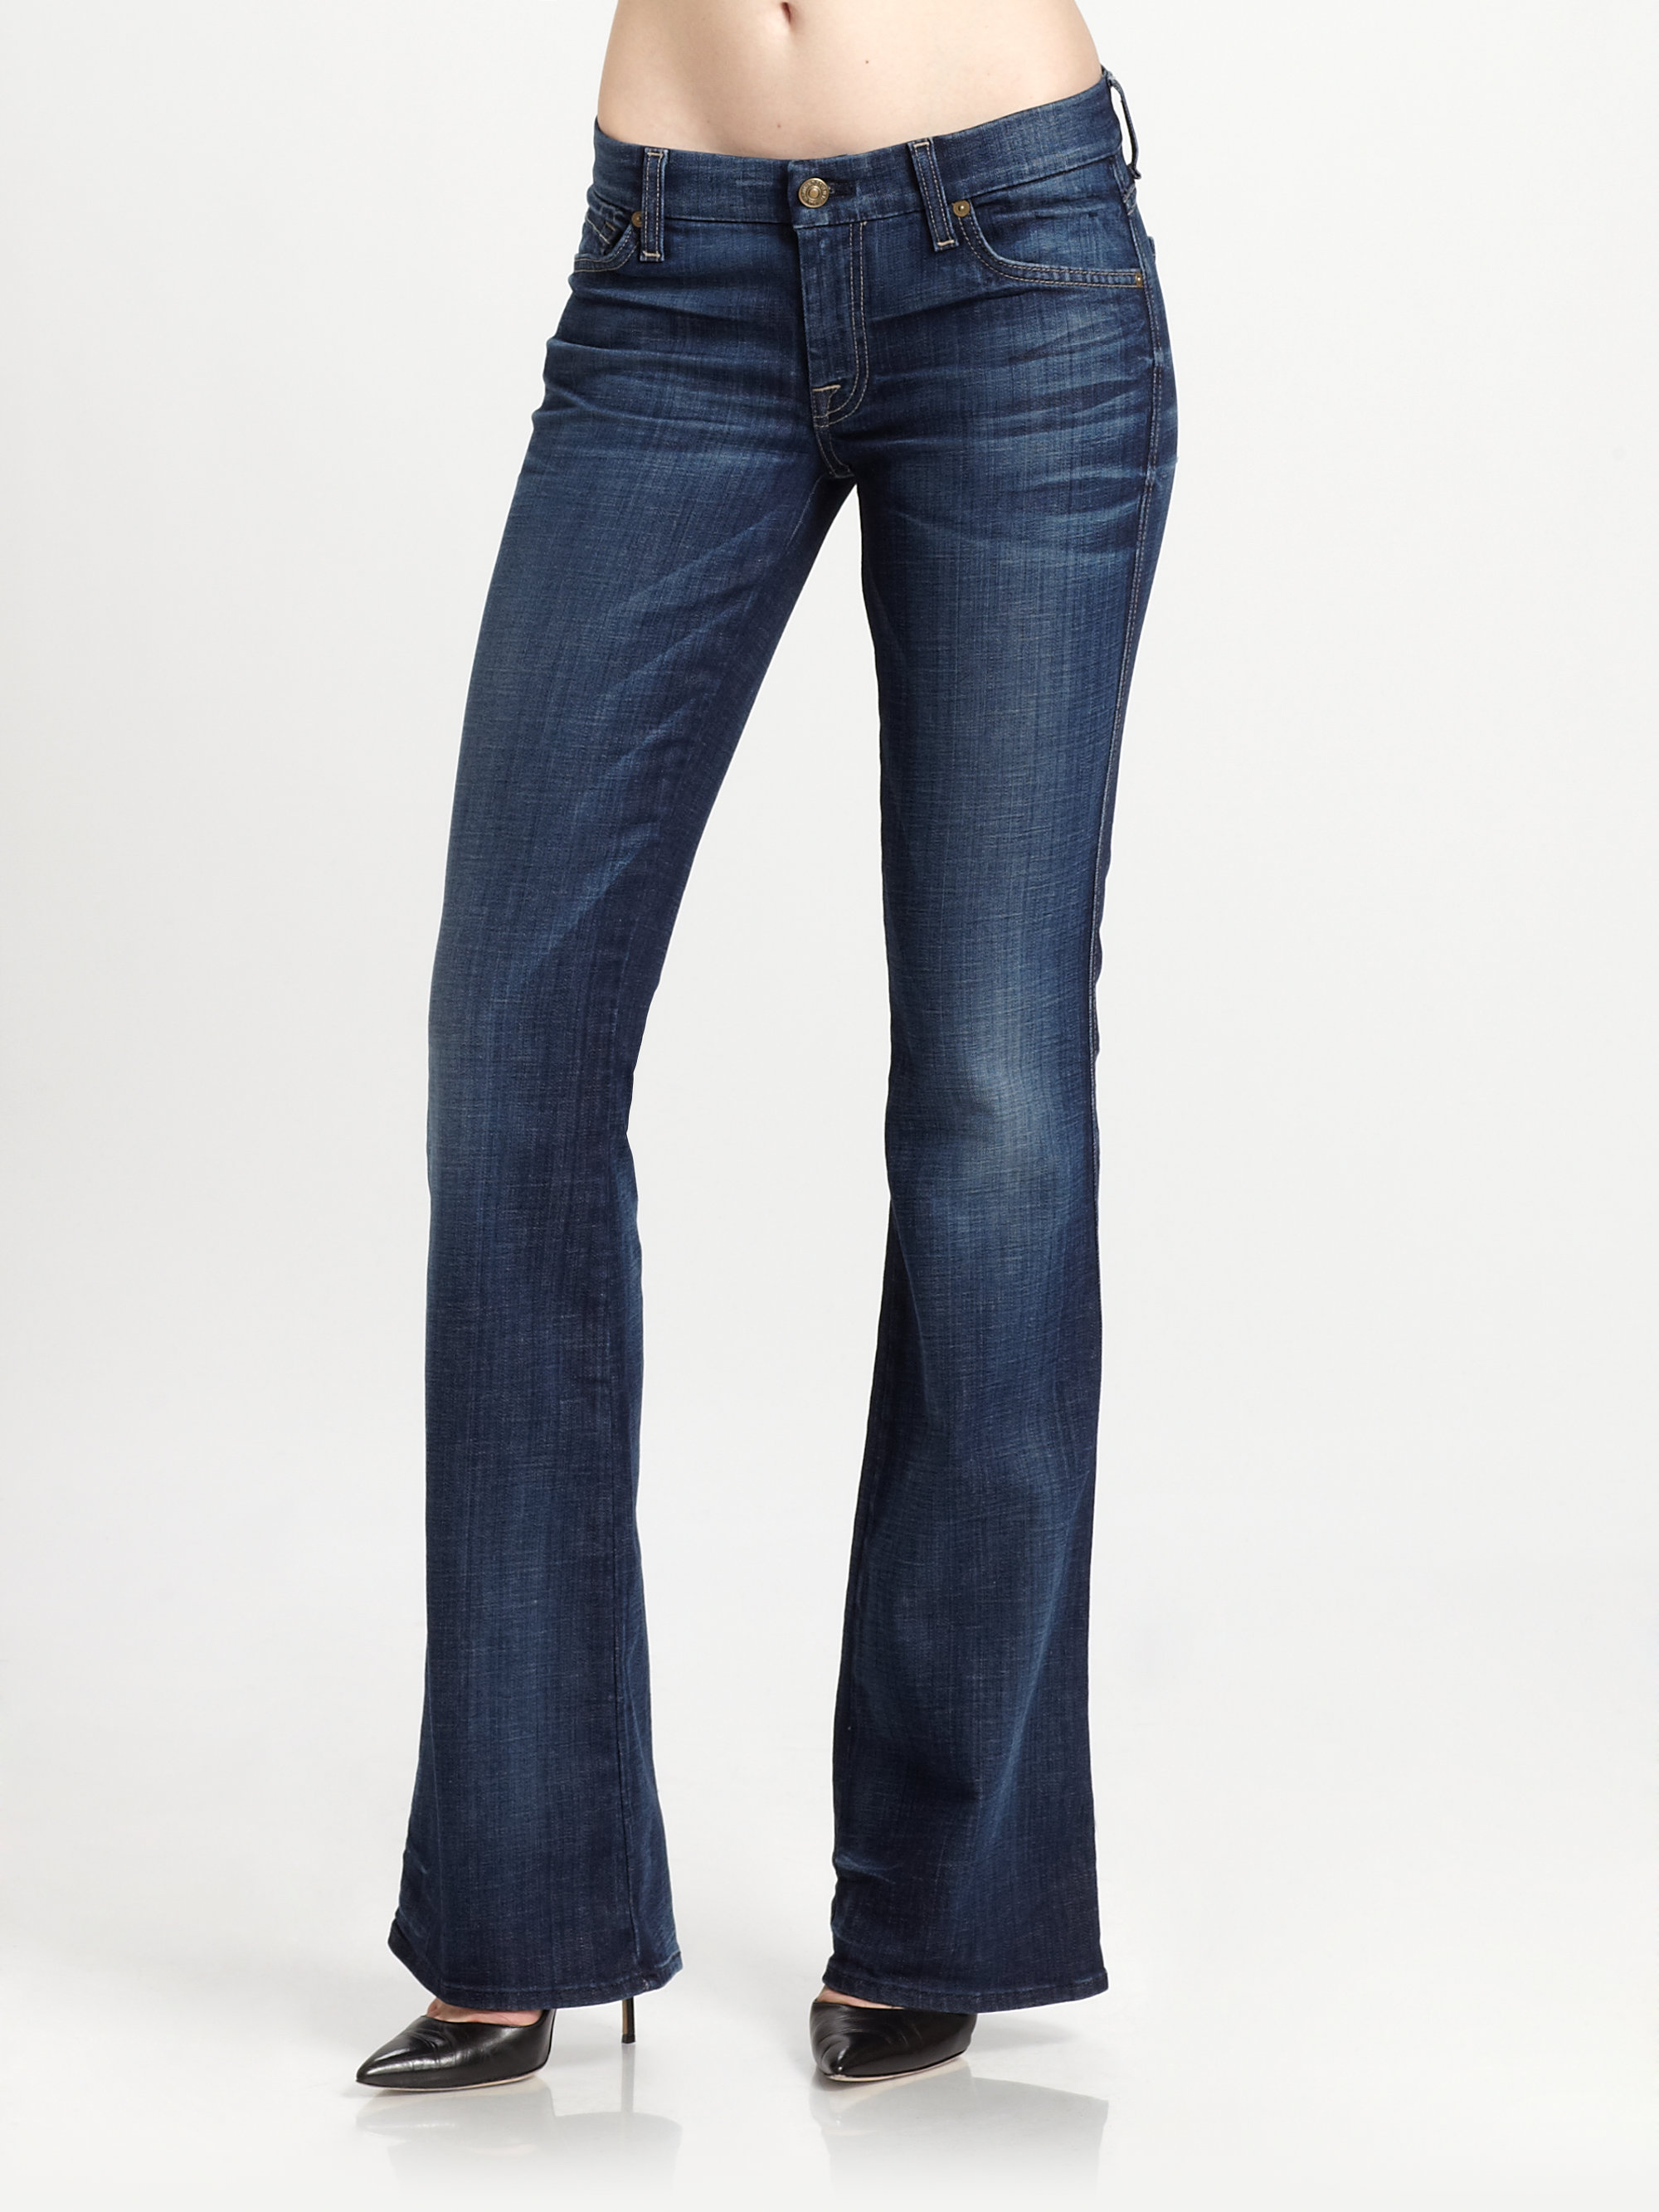 7 For All Mankind Apocket Bootcut Jeans in Blue Lyst